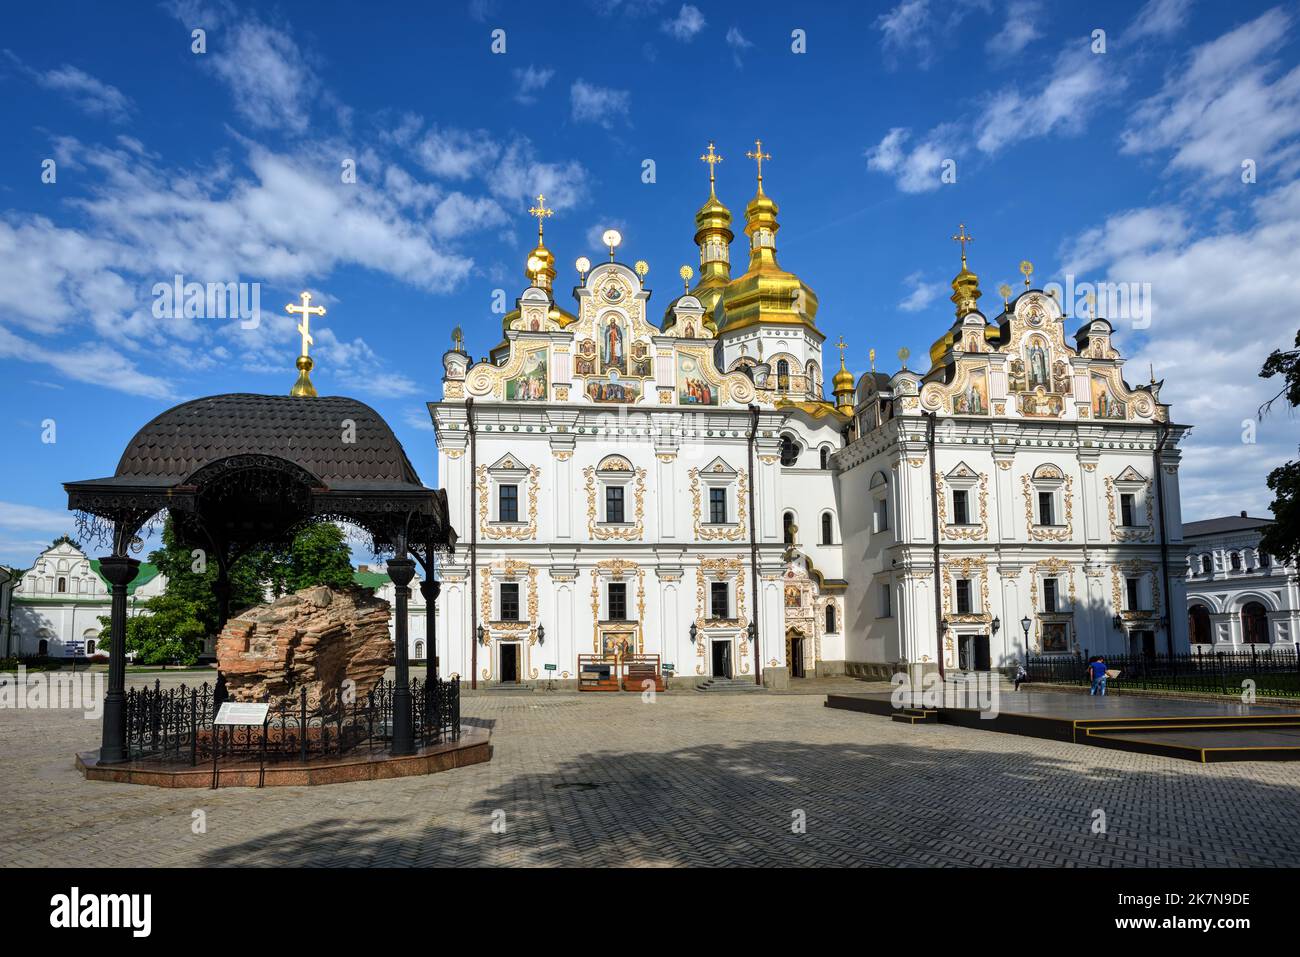 Cathedral of the Dormition, the main church in Kiev Pechersk Lavra monastery, one of the main centers of Eastern Orthodox Christianity, Kyiv city, Ukr Stock Photo